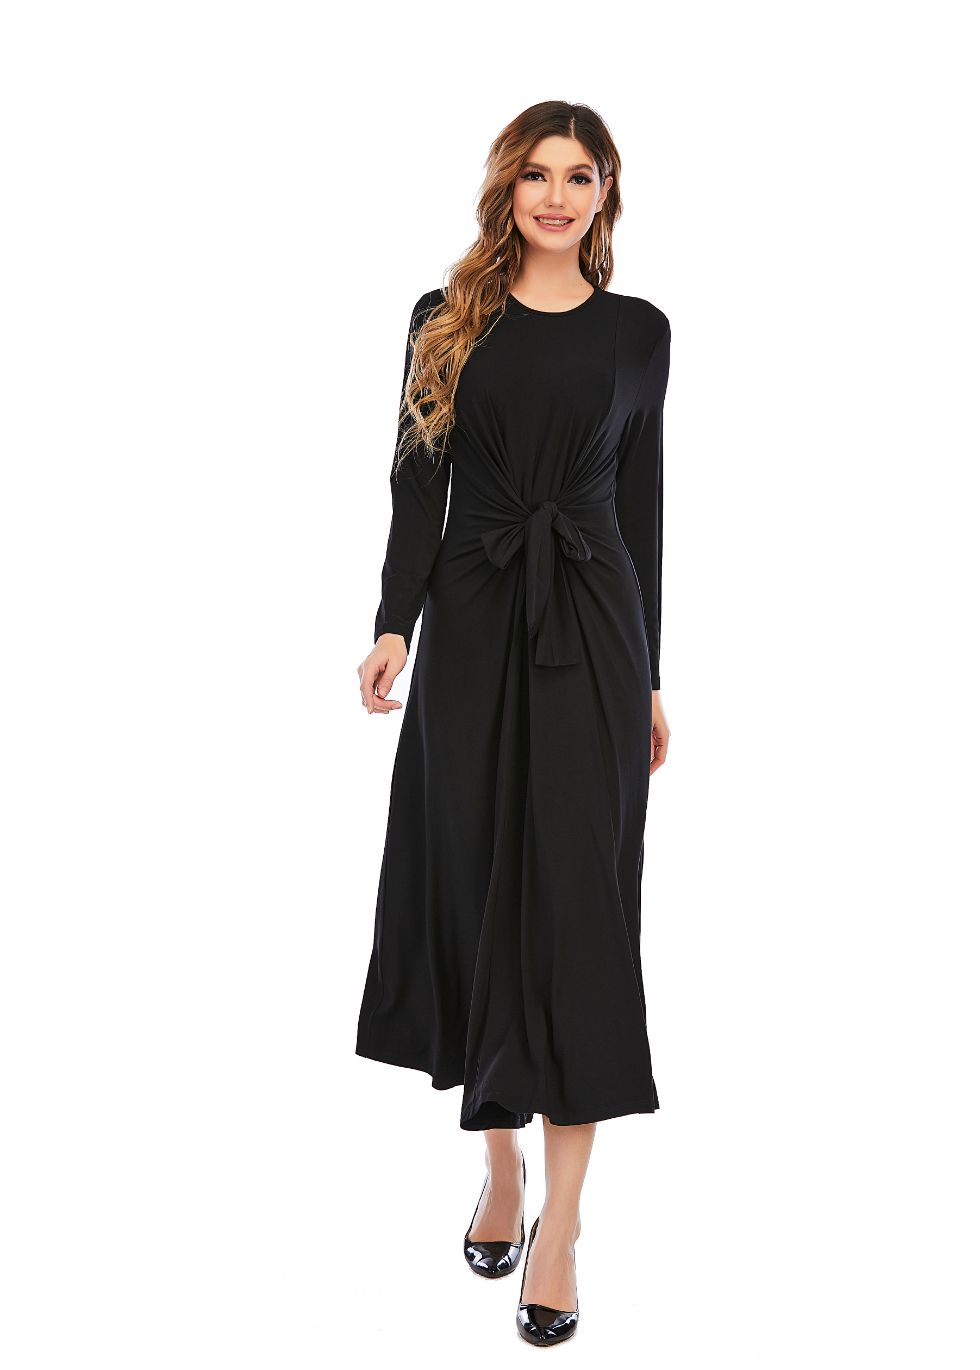 Long sleeve Knit Tie Front Midi Dress - figaliciousfood